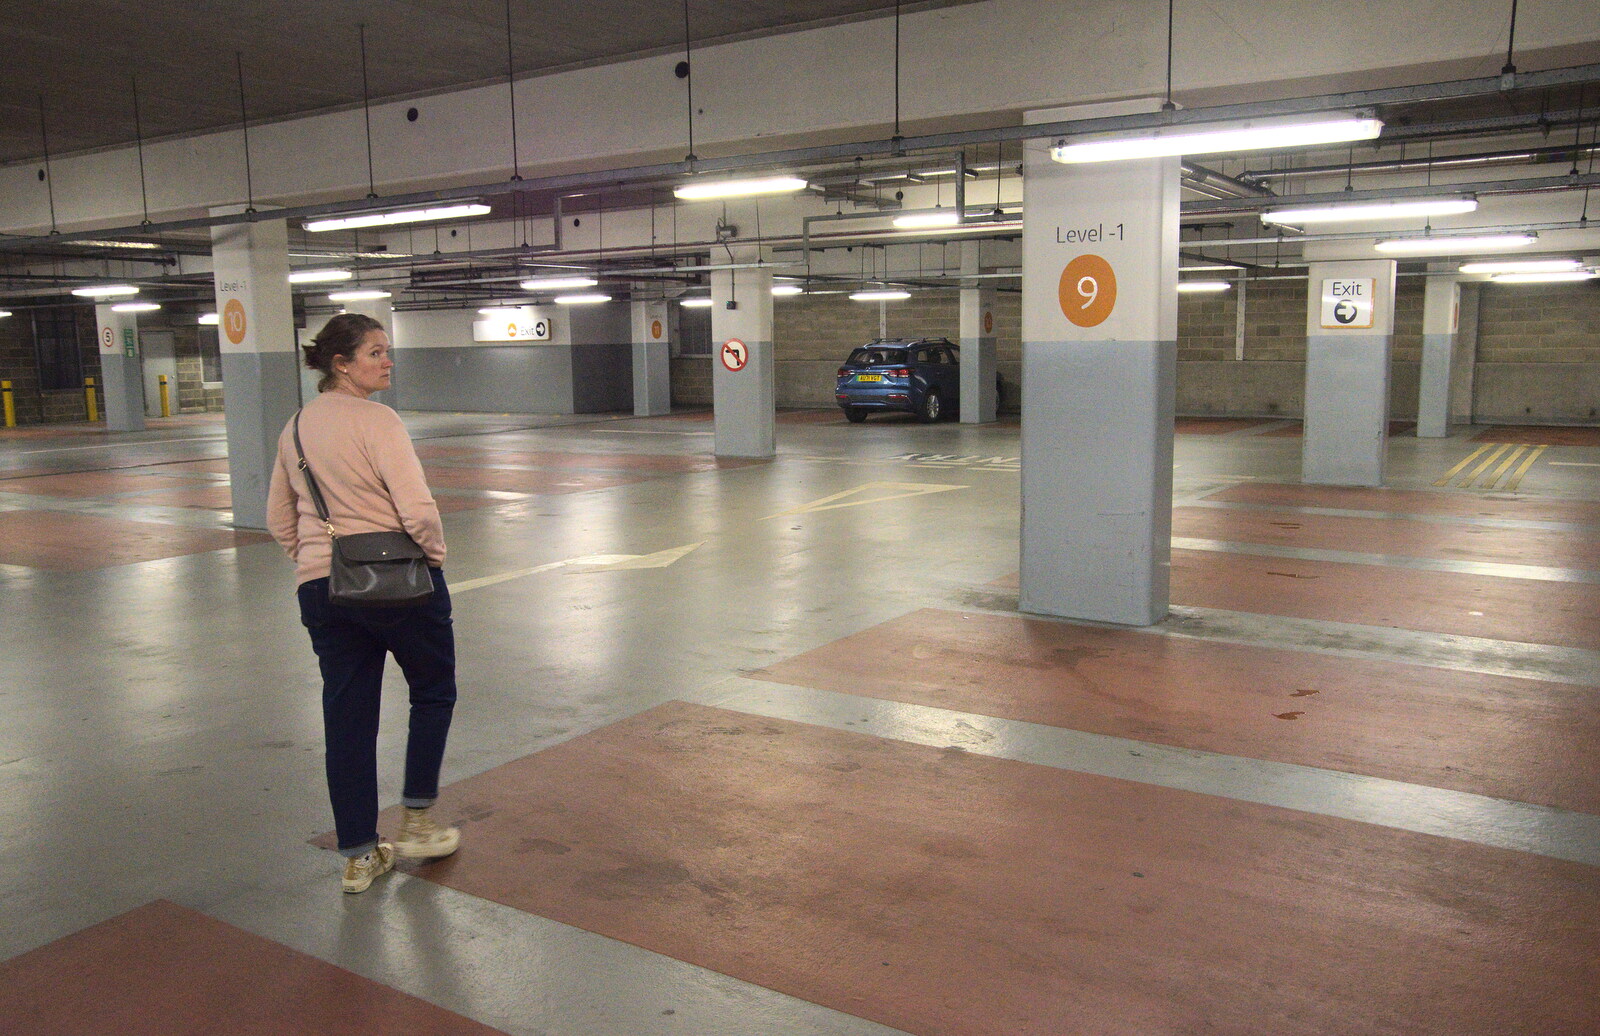 Isobel in the Chapelfield underground car park from The BSCC at Burston and The Legend of Swallow Aquatics, East Harling, Norfolk - 15th May 2022